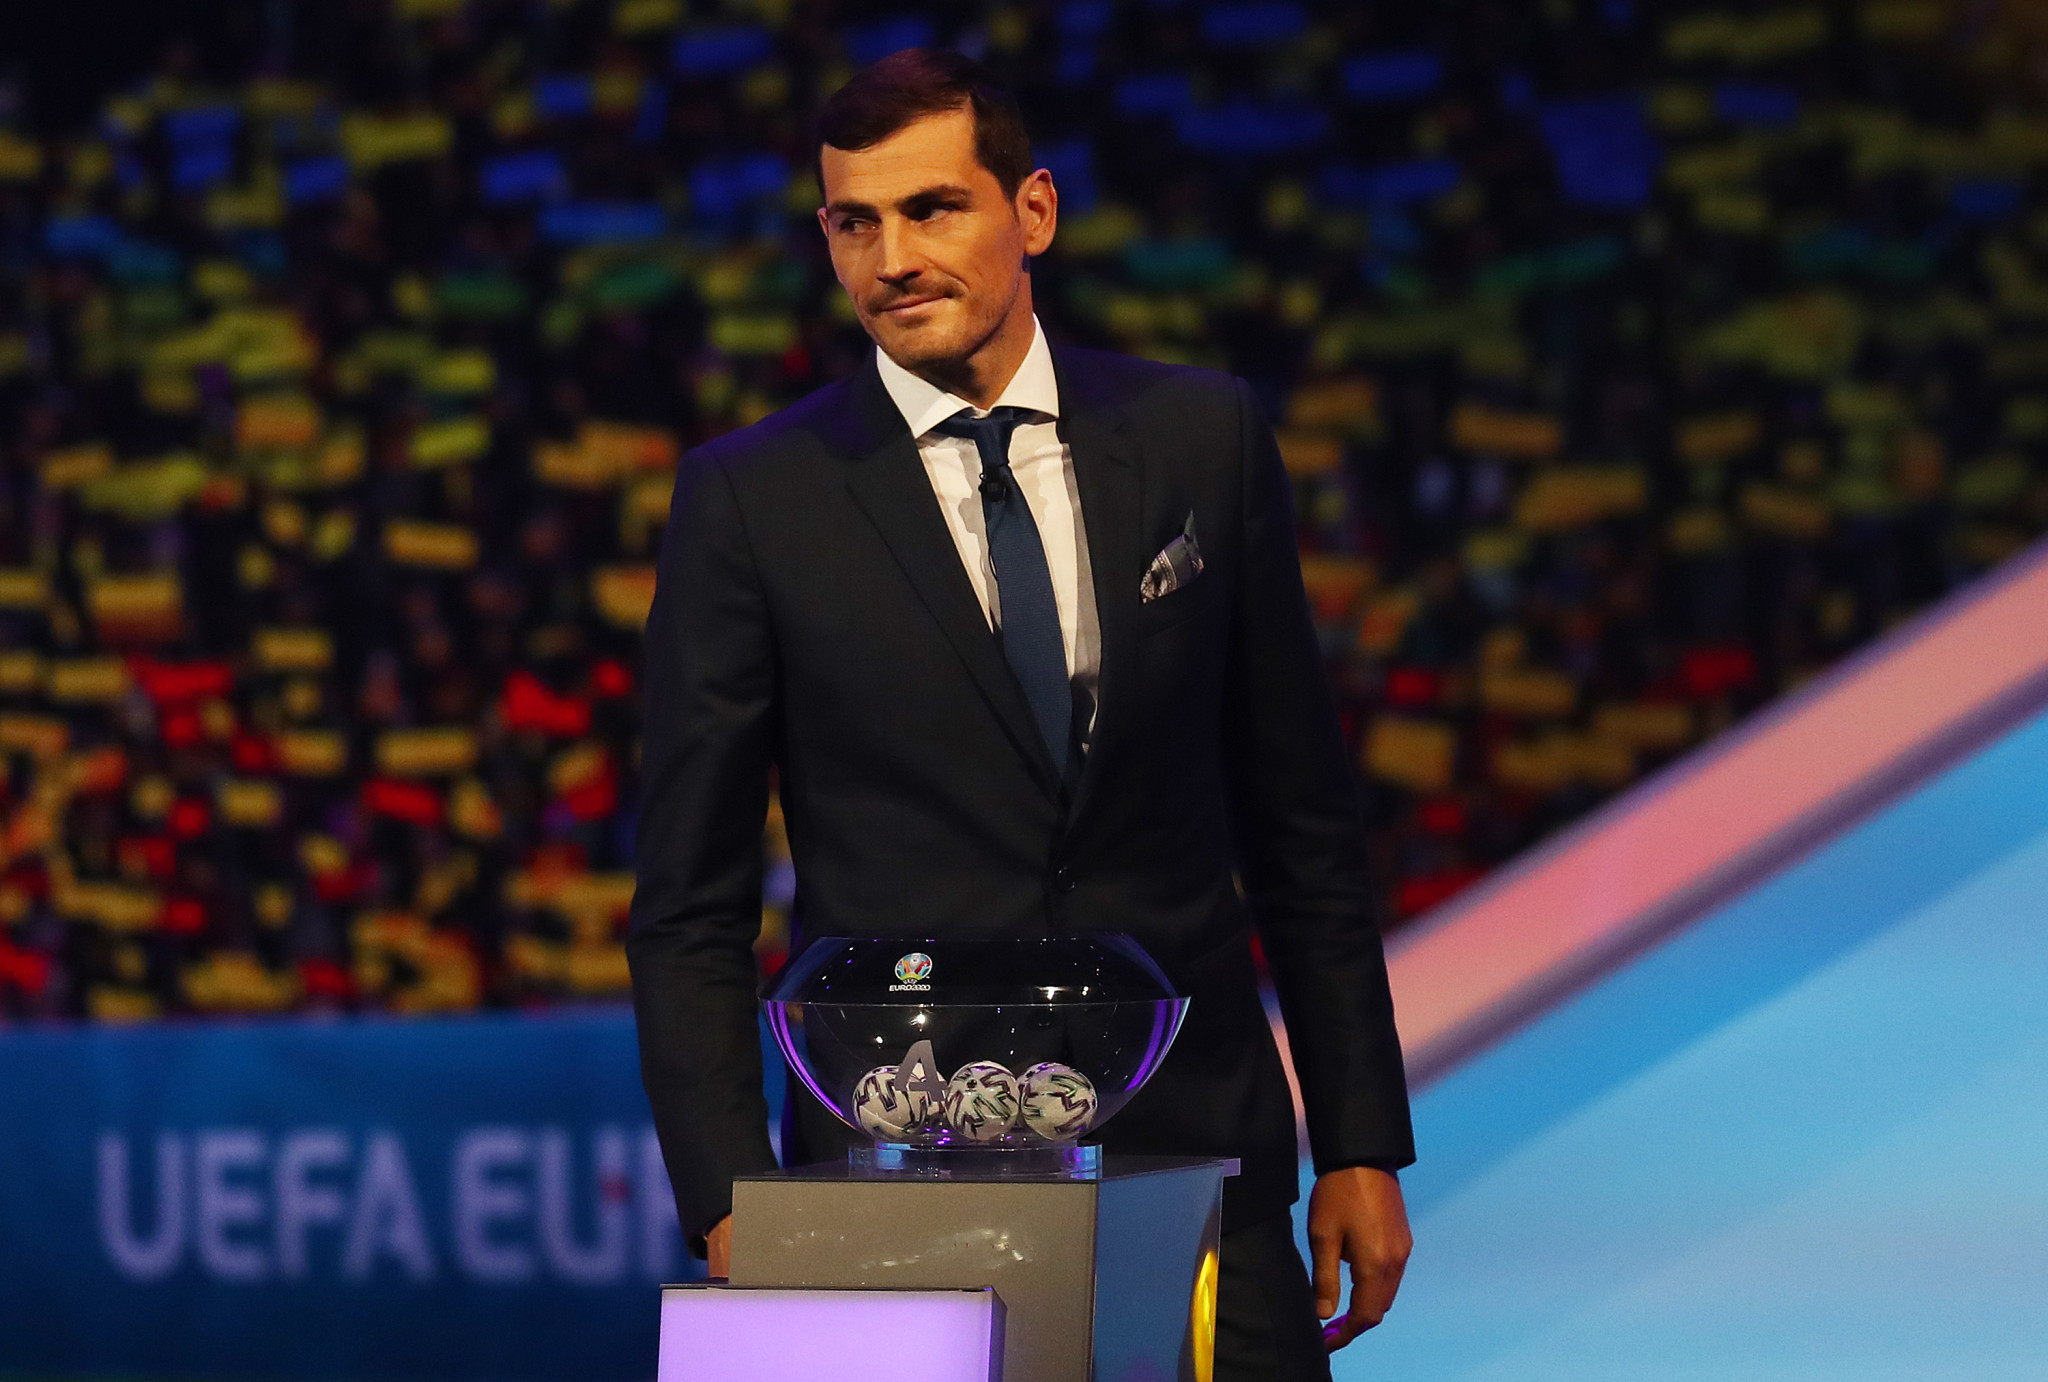 Iker Casillas is to challenge incumbent Luis Rubiales for the Spanish Football Federation Presidency ©Getty Images